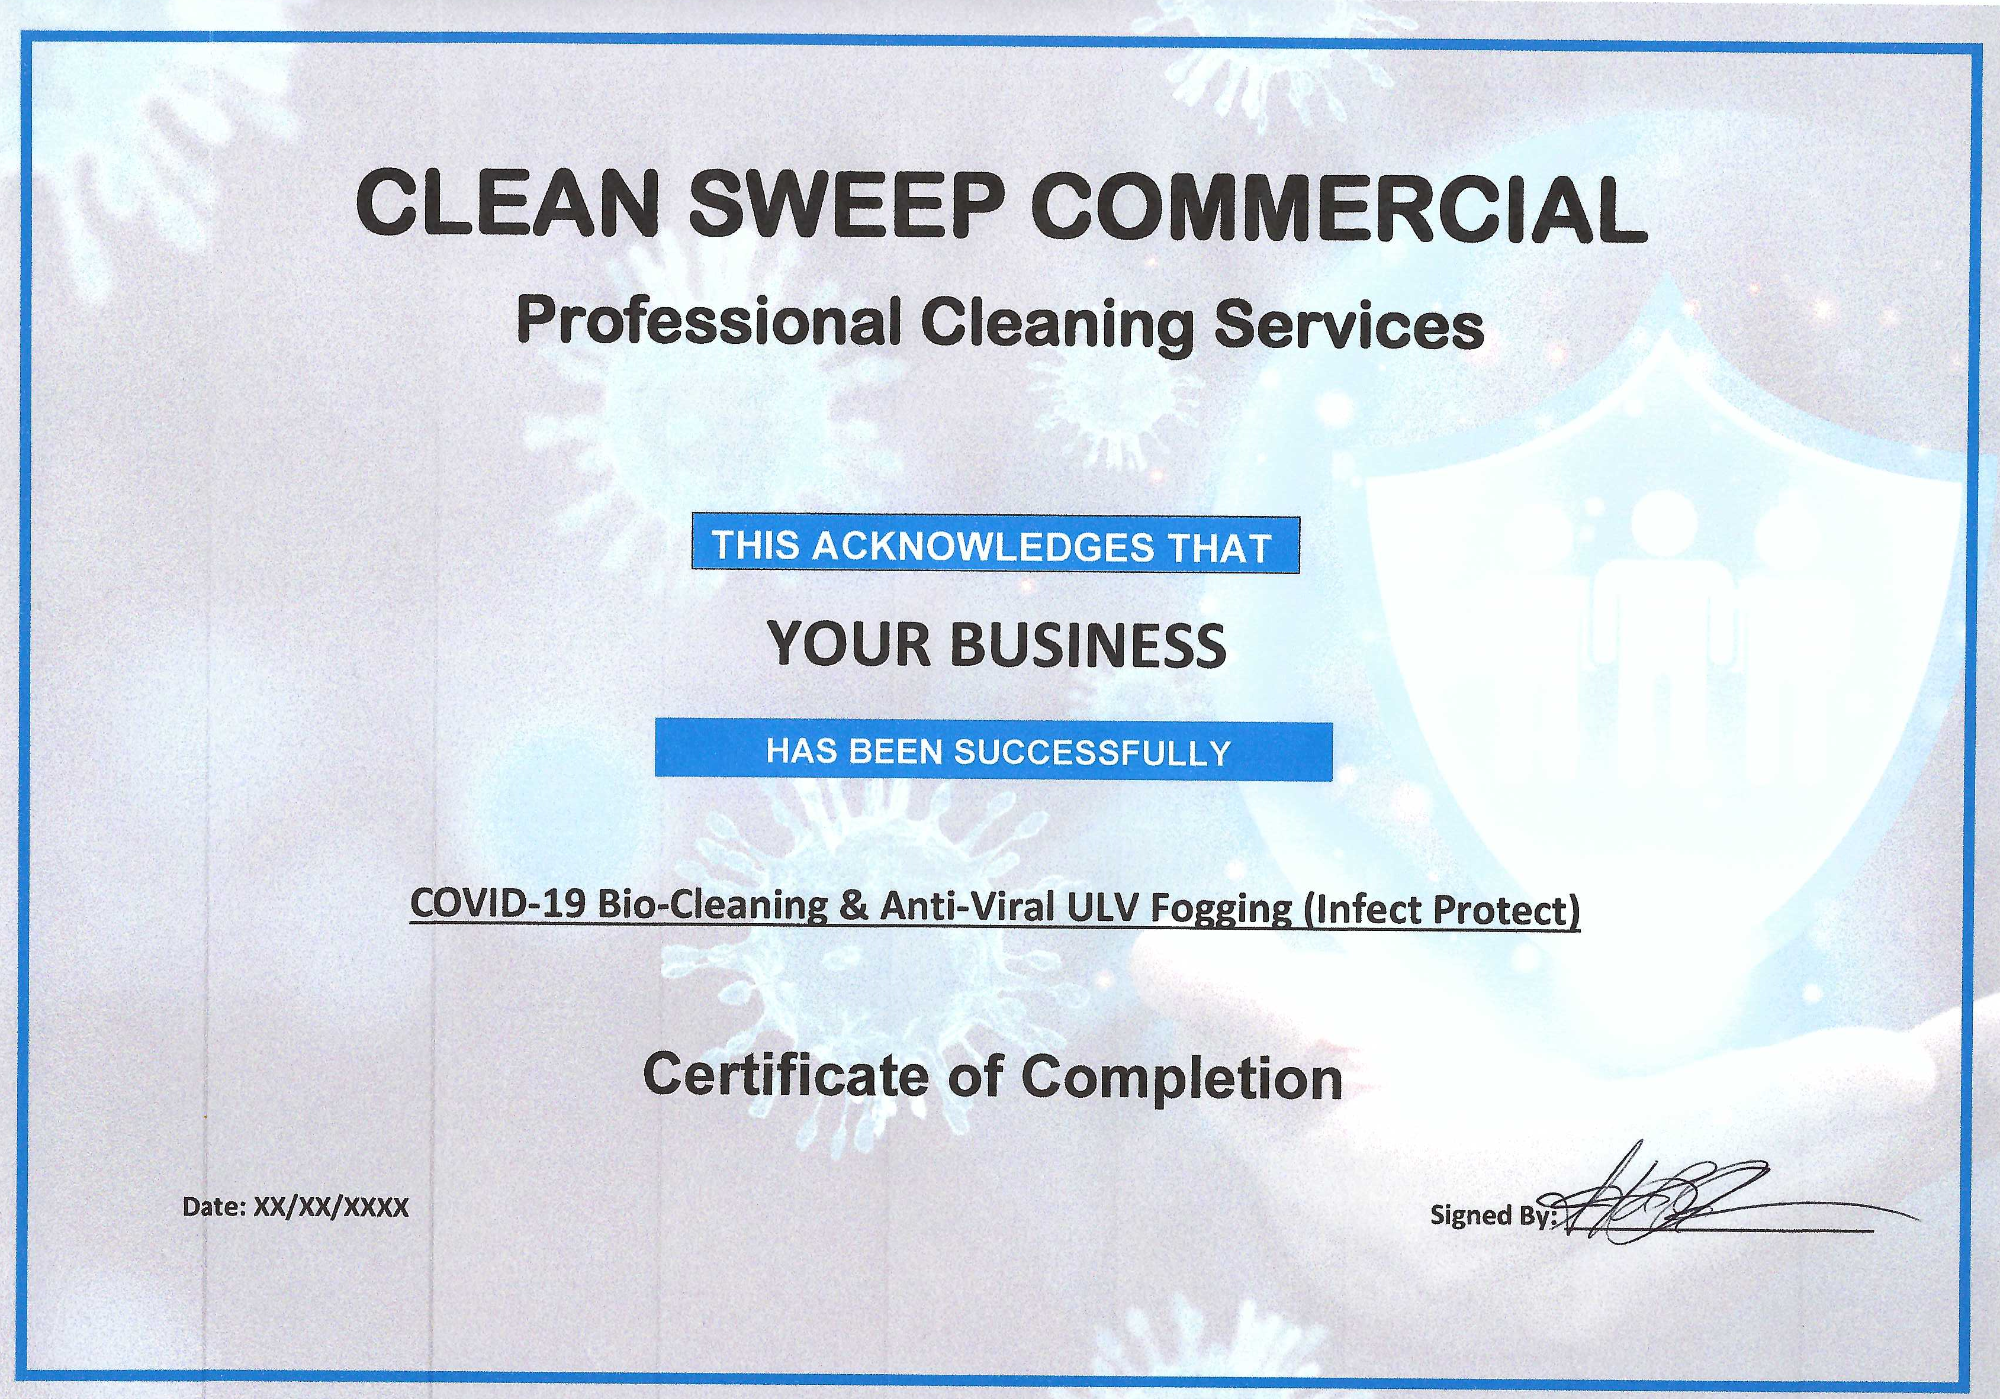 cleansweep-commercial-certificate-completition-retford